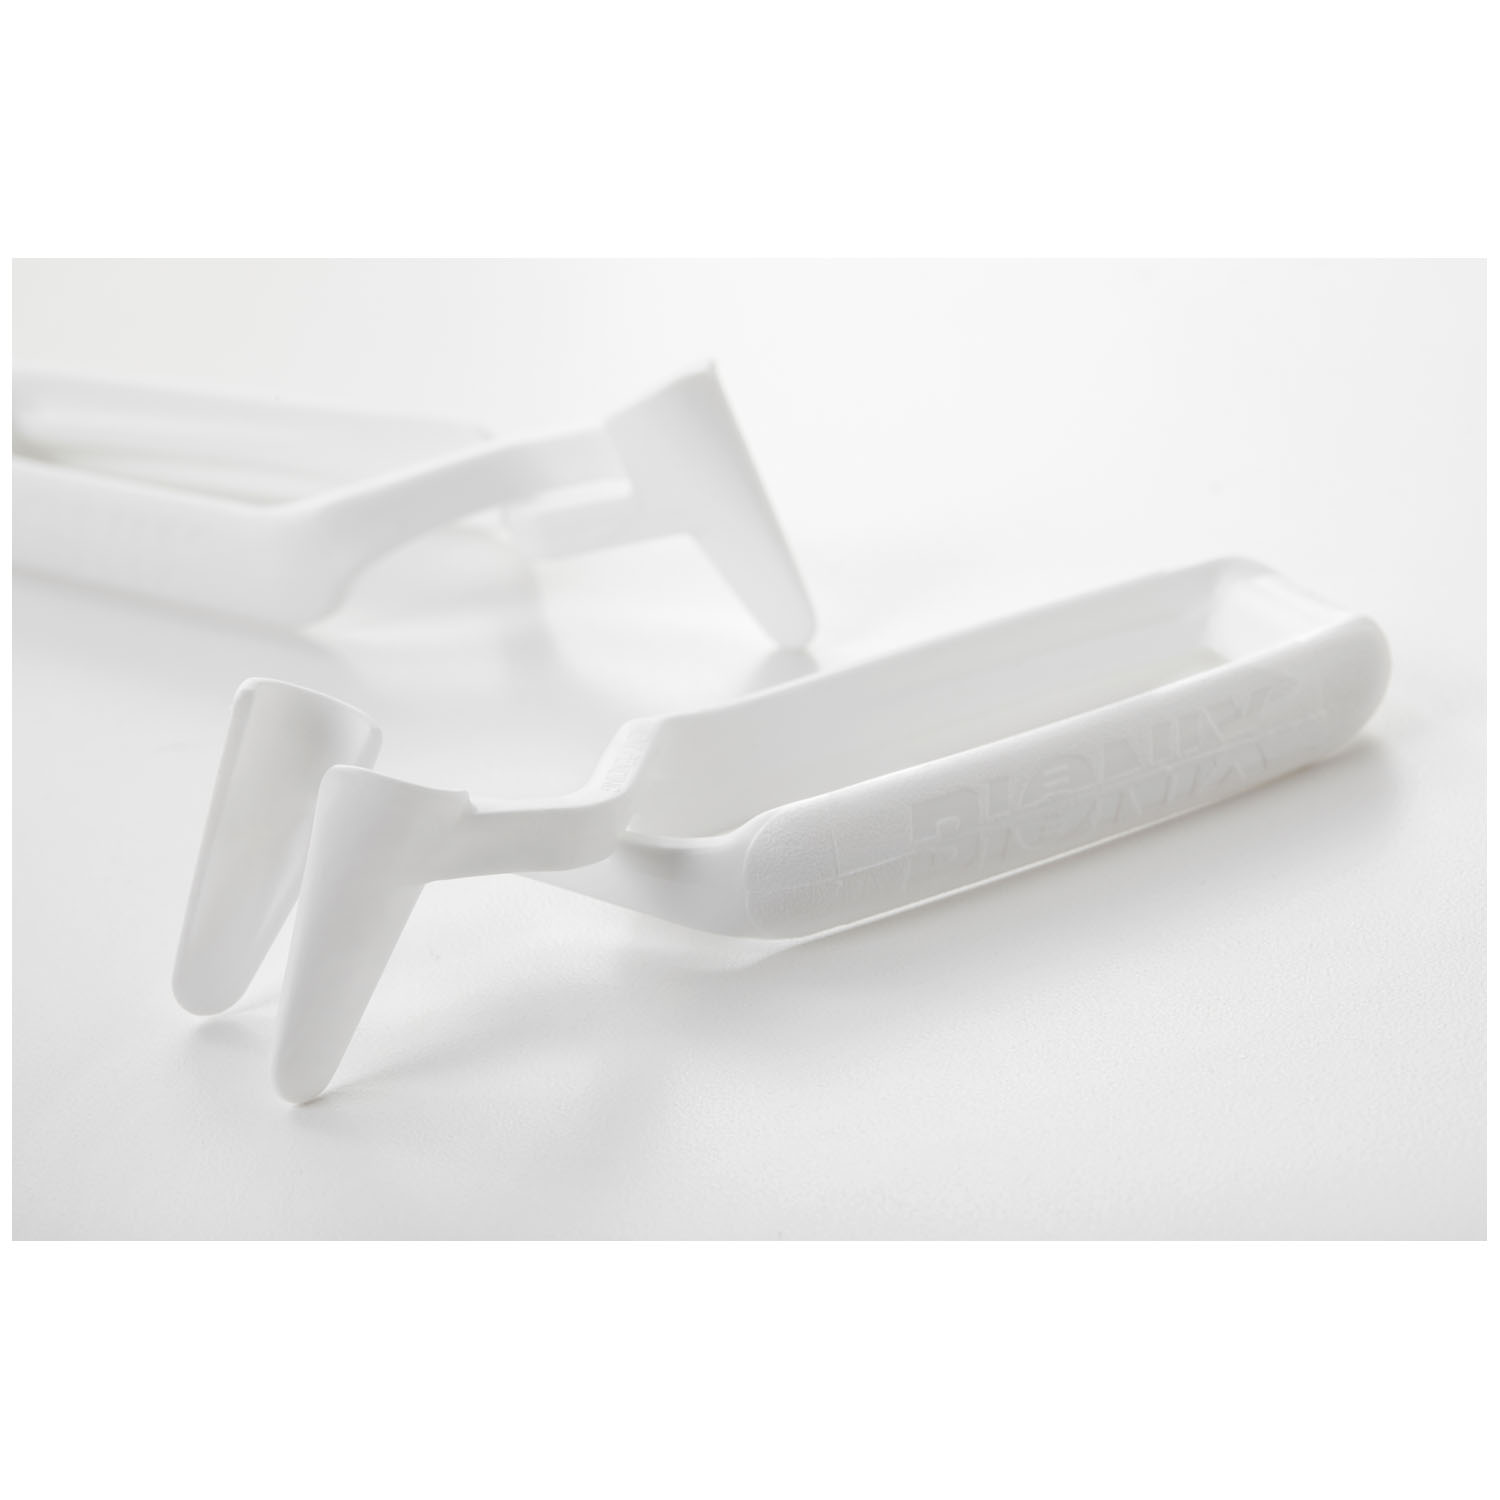 BIONIX DISPOSABLE NASAL SPECULUM : 9877 BX      $60.29 Stocked